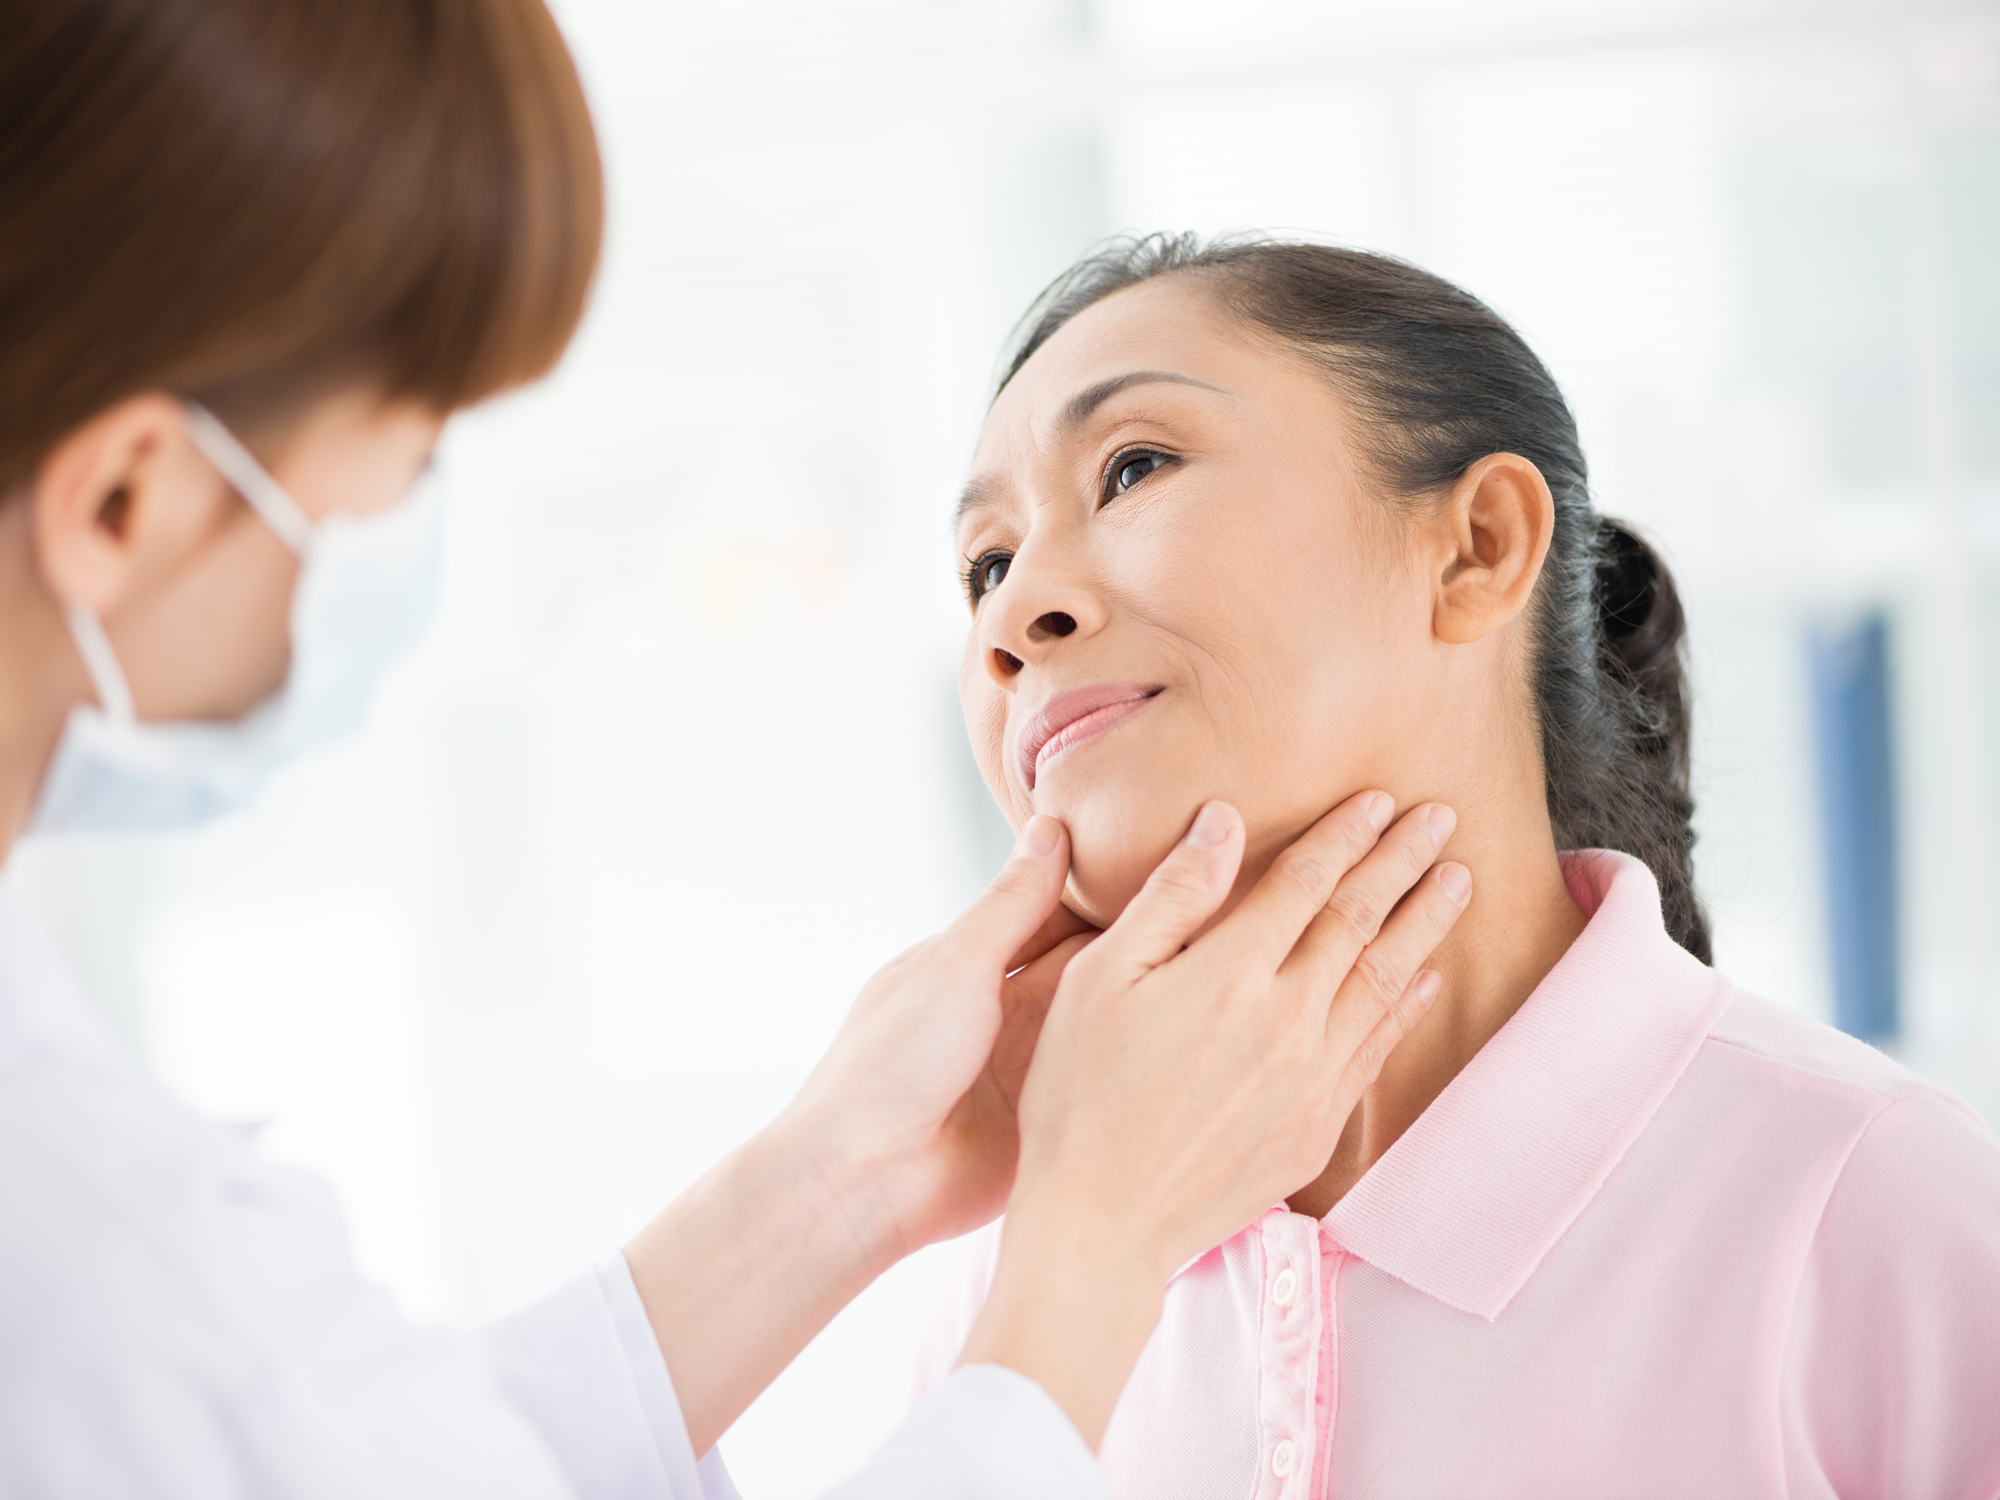 Why the rise in thyroid problems?